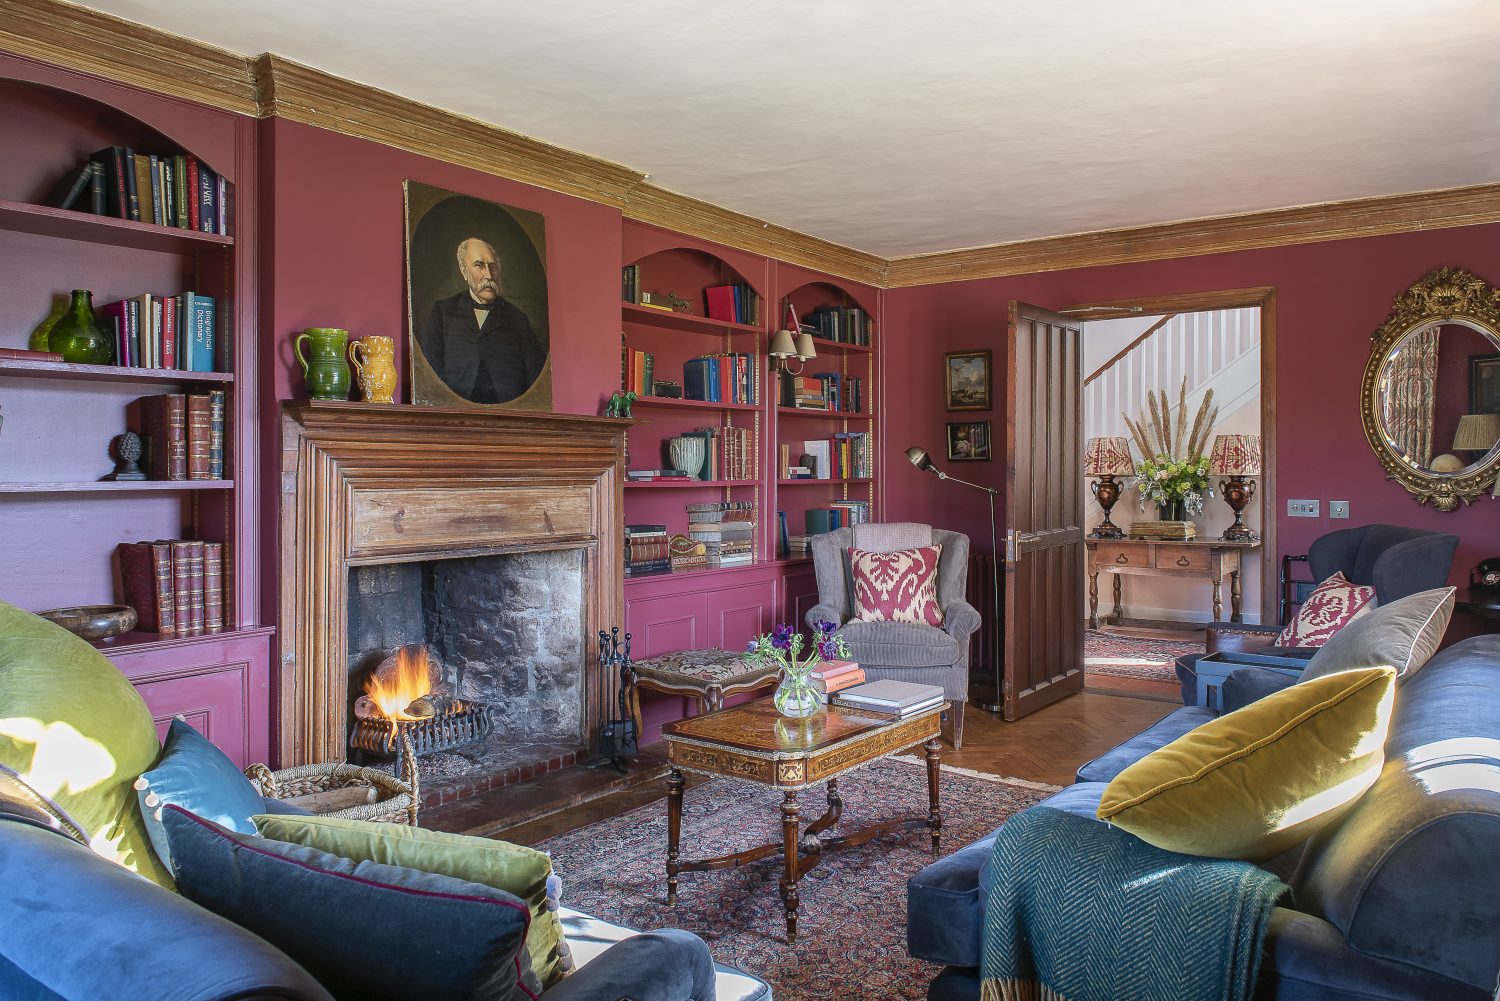 The walls in the drawing room are painted in Bone by Farrow & Ball